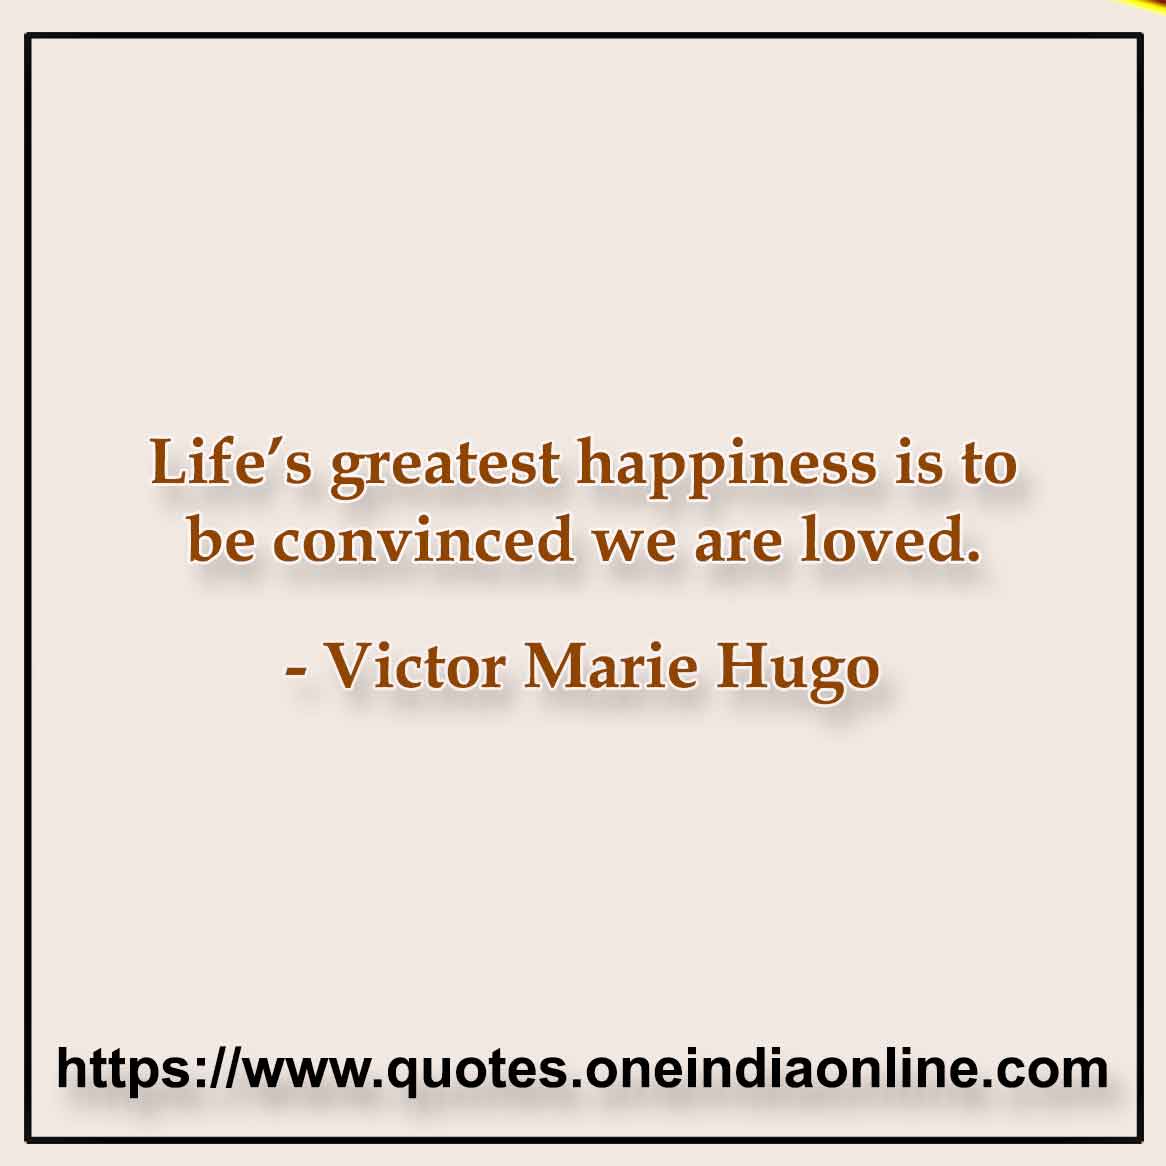 Life’s greatest happiness is to be convinced we are loved.

- Famous Happy Quotes by Victor Marie Hugo 